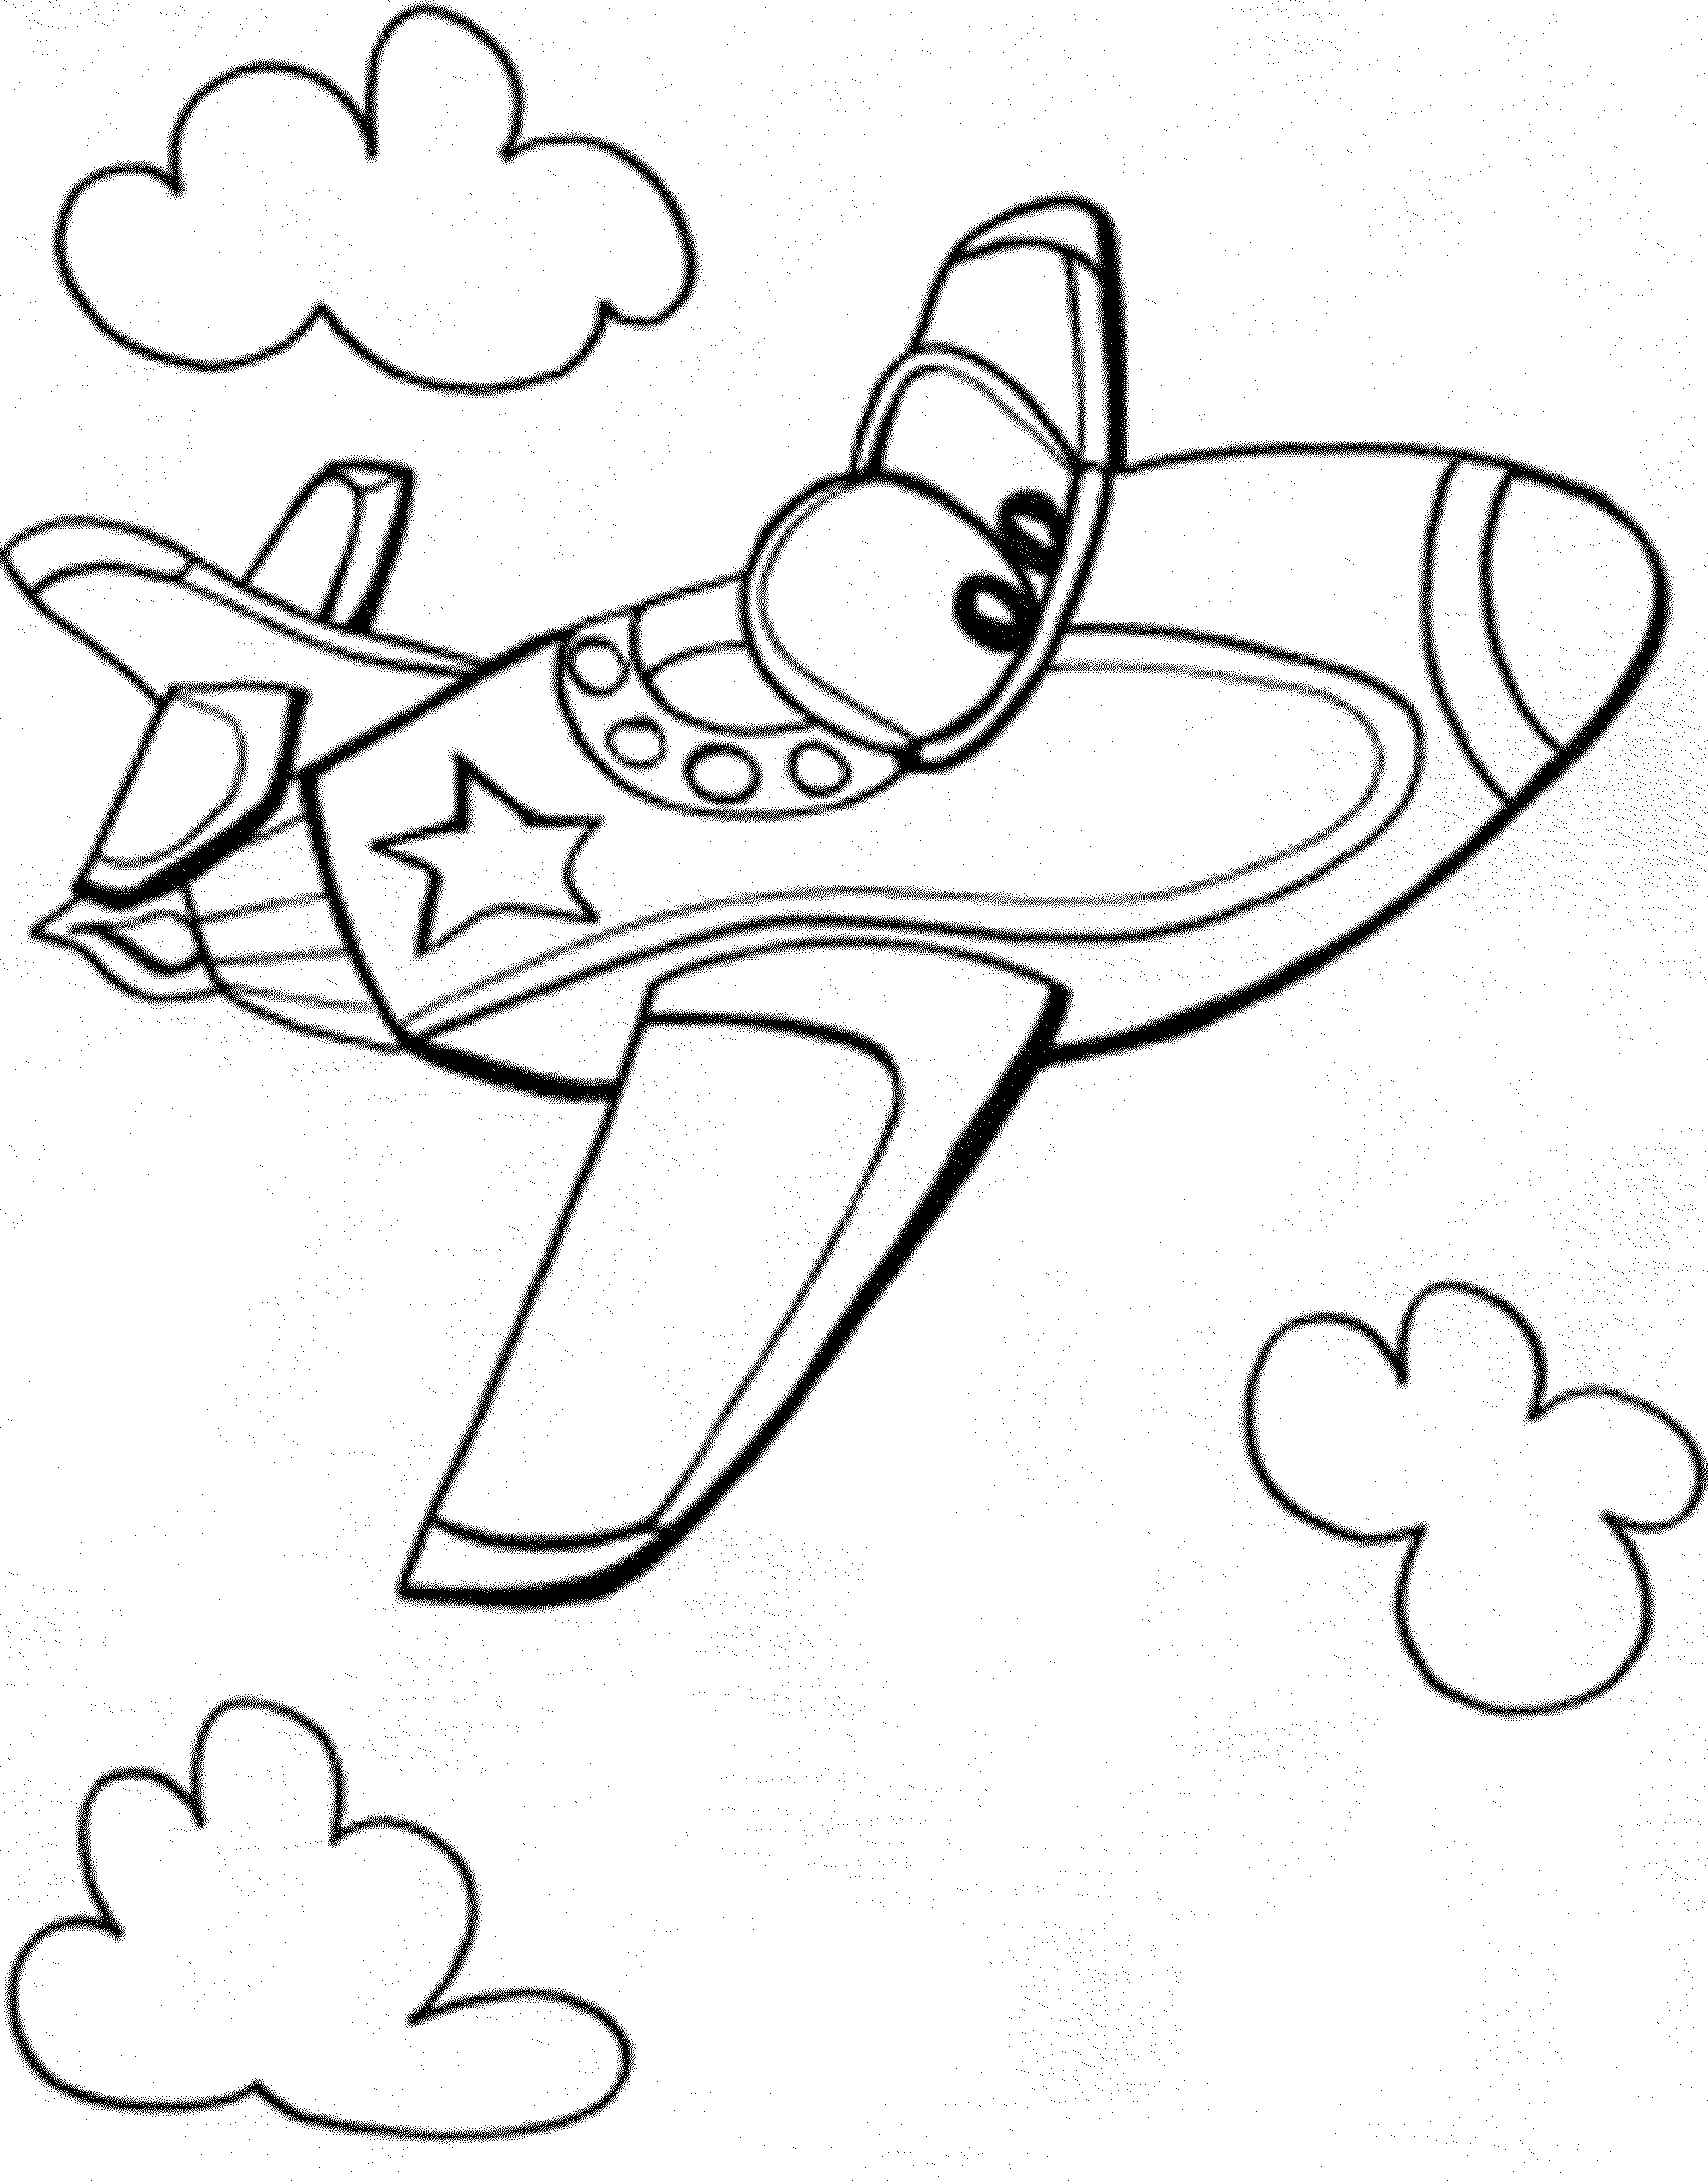 Air Plane Coloring Pages   Coloring Cool